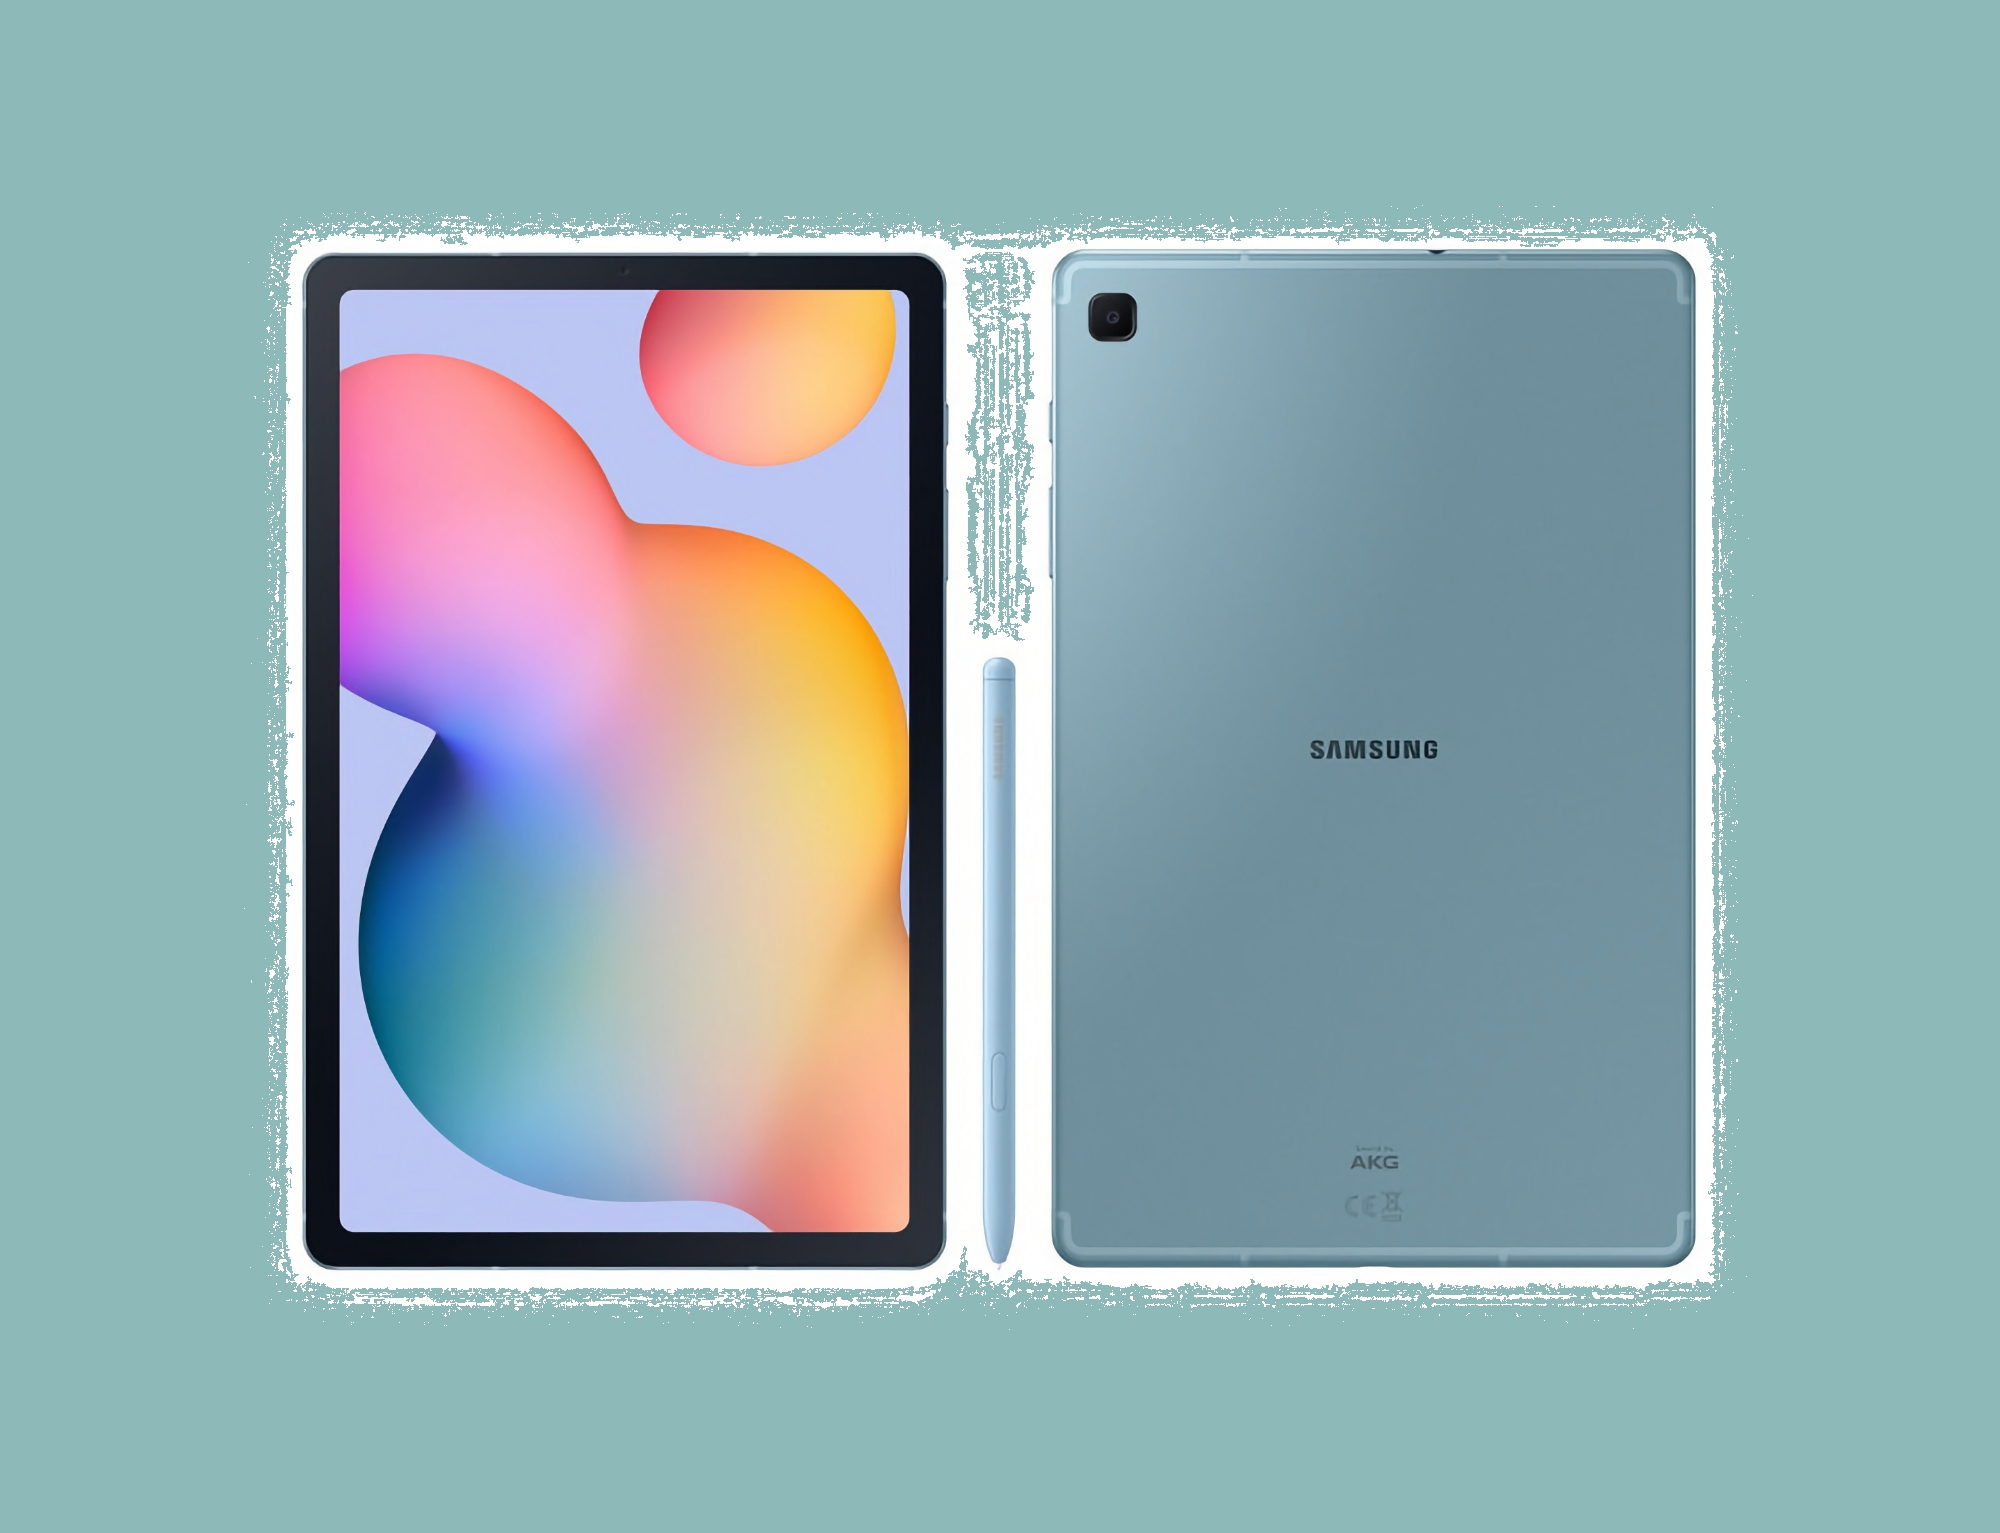 Samsung Galaxy Tab S6 Lite is available on Amazon with a discount of up to $157